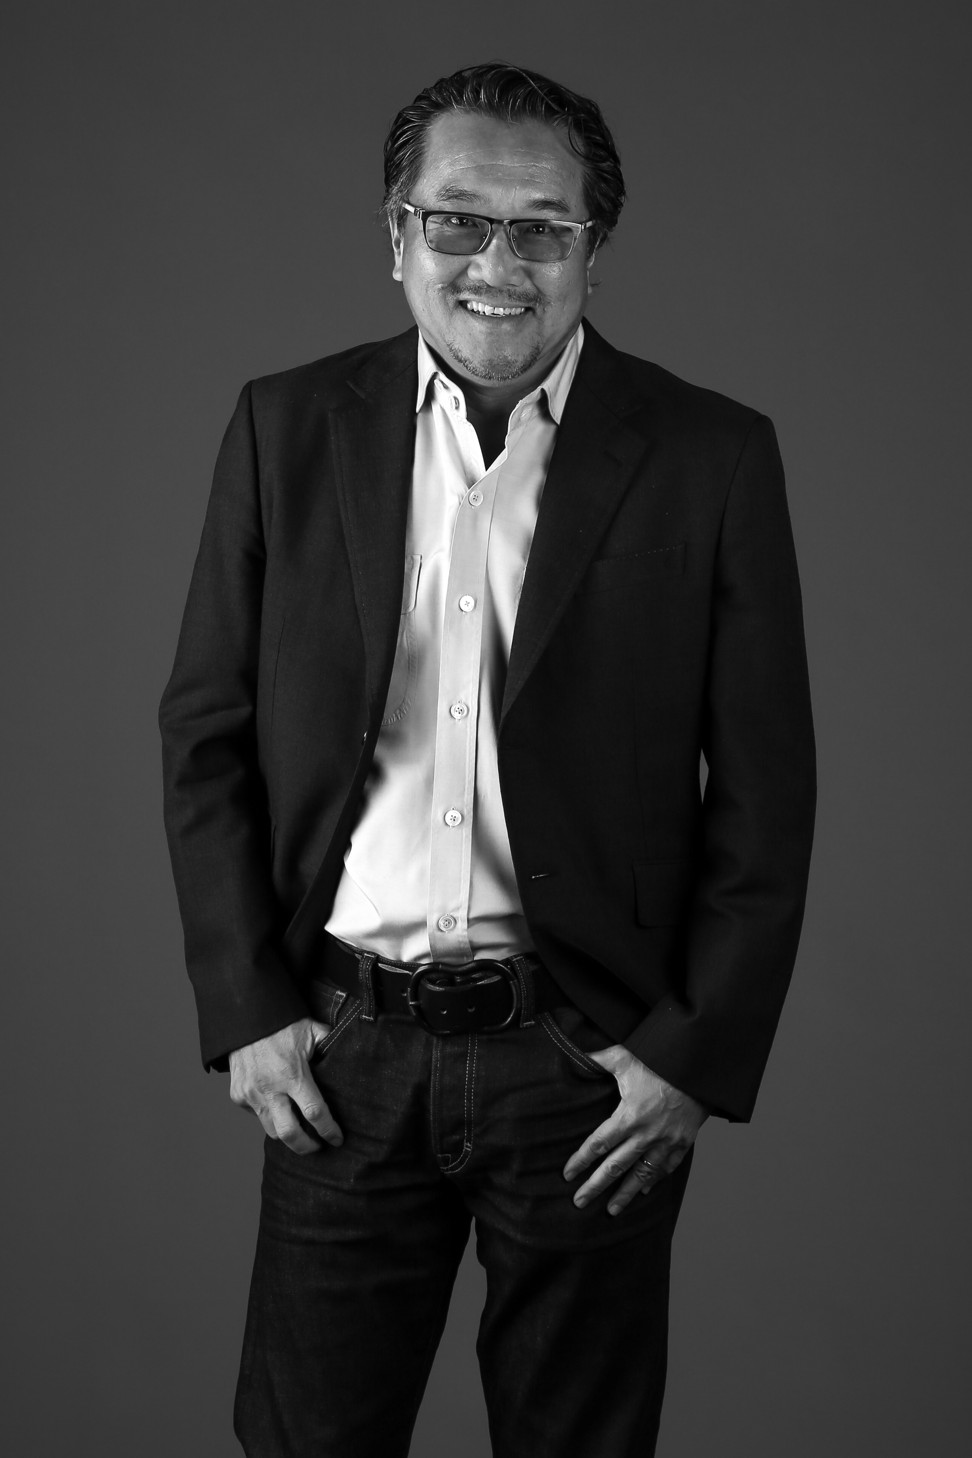 Liam Wee Tay is Asia chairman for Watchbox.